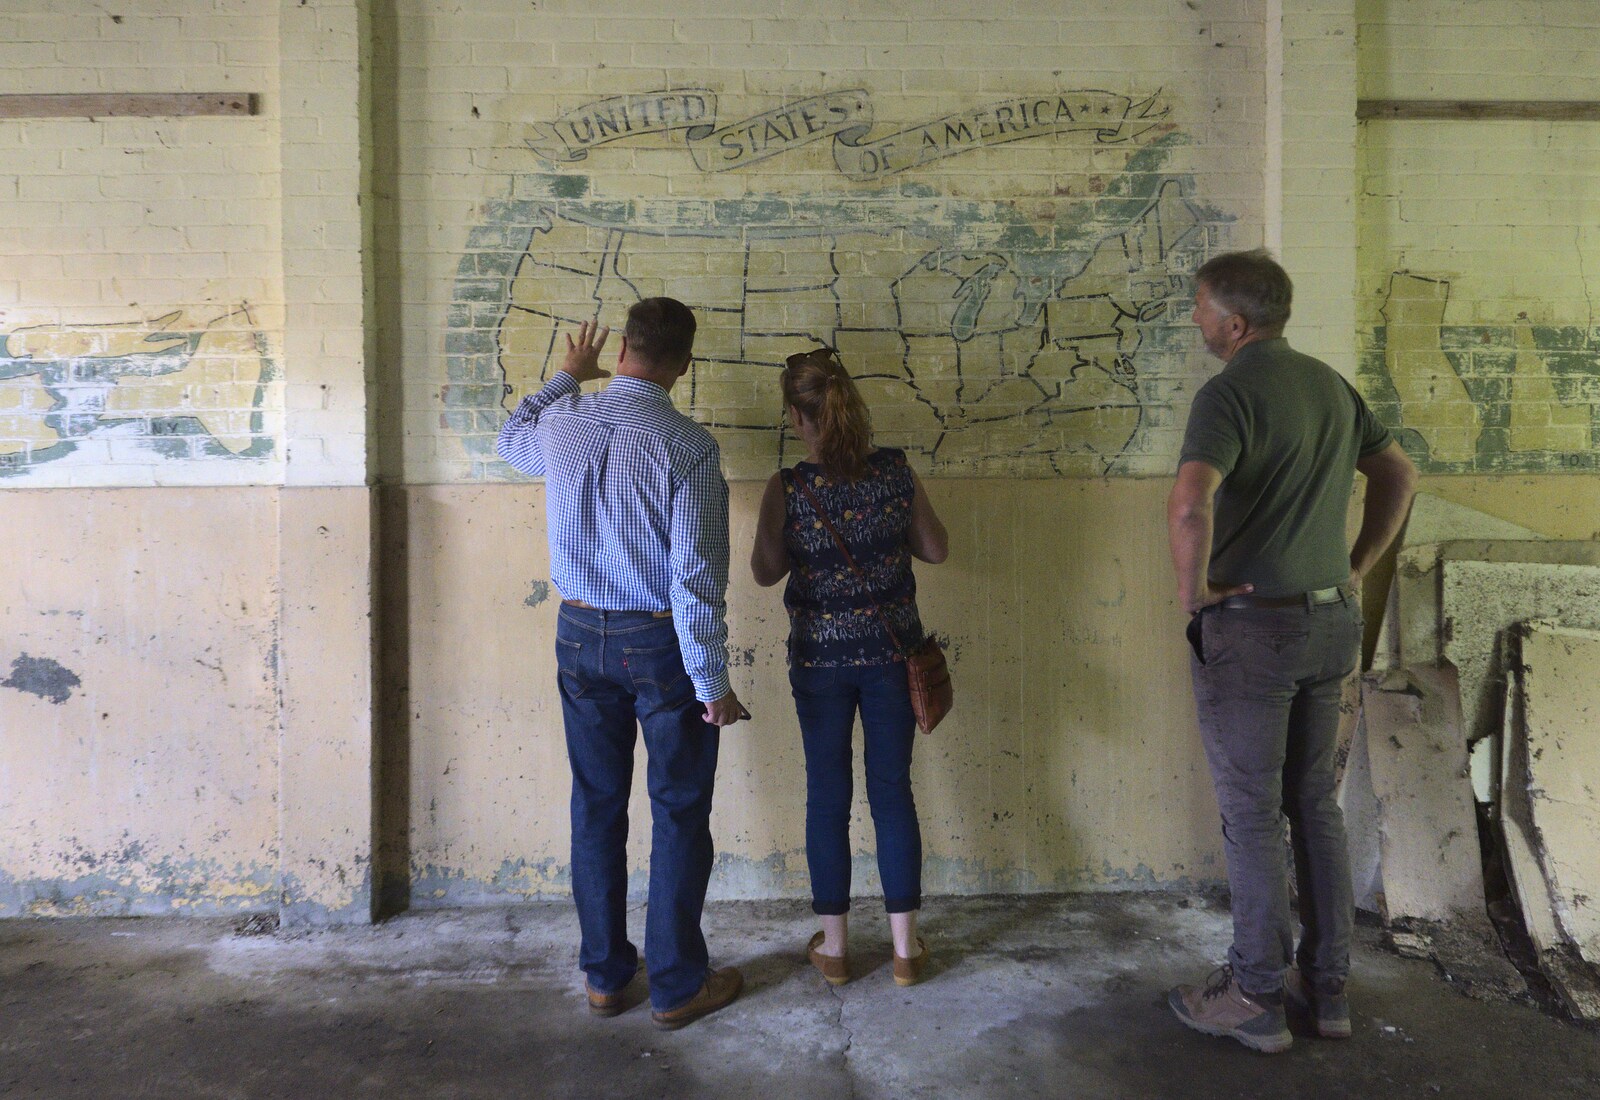 The remains of a map of the USA from A 1940s Timewarp, Site 4, Bungay Airfield, Flixton, Suffolk - 9th June 2022